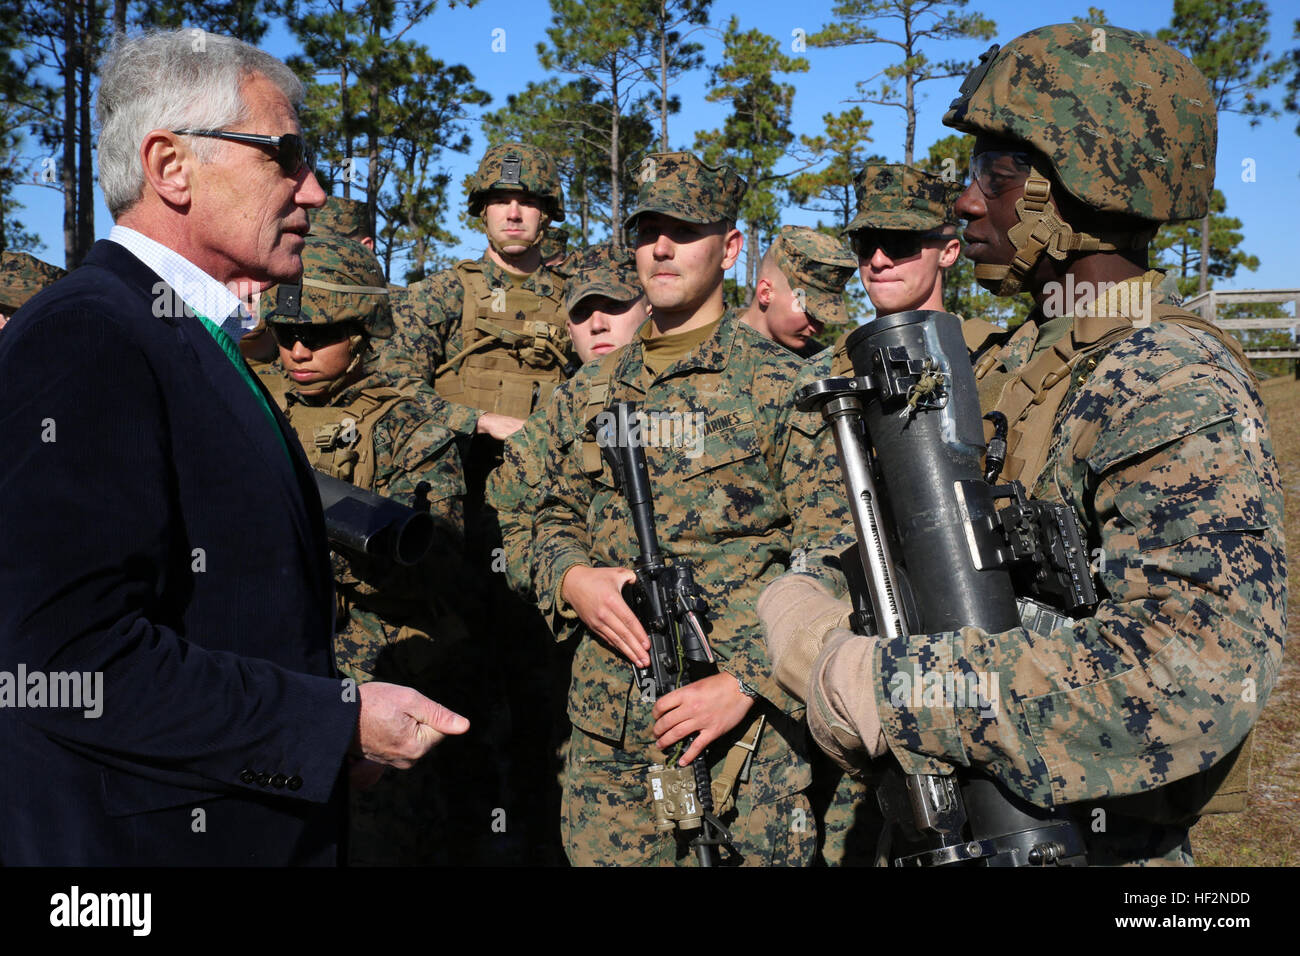 Secretary of Defense Chuck Hagel talks to Cpl. Jeanboris Mugisha, anti-tank missileman with the Anti-Armor Section, Weapons Company, Ground Combat Element Integrated Task Force, after observing the Marines fire the Mk-153 shoulder-launched multipurpose assault weapon (SMAW) during his visit to Marine Corps Base Camp Lejeune, North Carolina, Nov. 18, 2014. (U.S. Marine Corps photo by Sgt. Alicia R. Leaders/Released) Secretary of Defense visits Integrated Task Force Marines 141118-M-DU612-208 Stock Photo